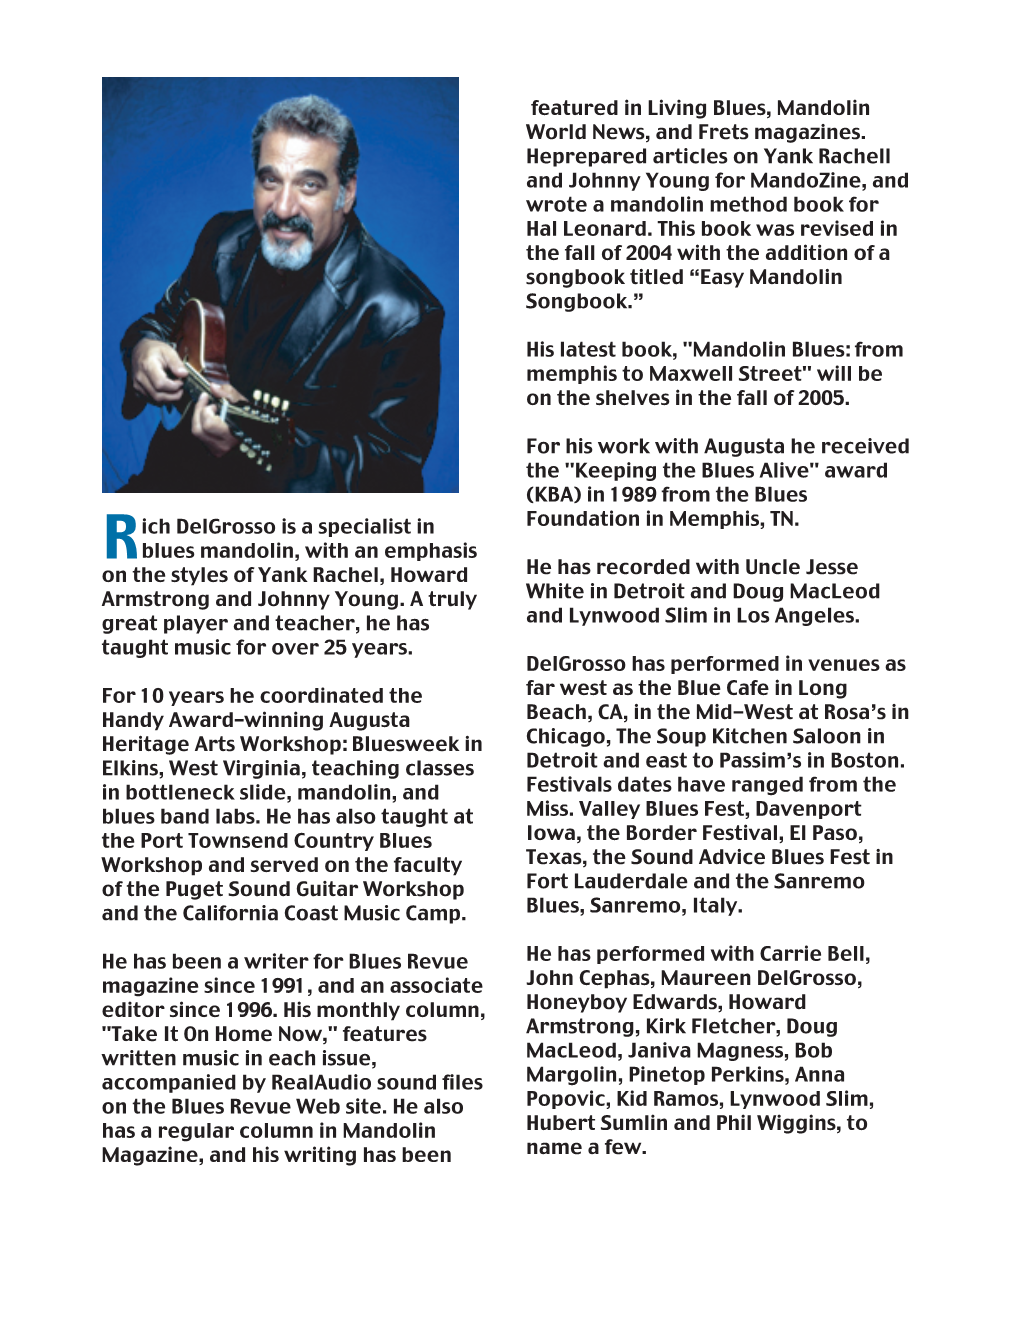 Featured in Living Blues, Mandolin World News, and Frets Magazines